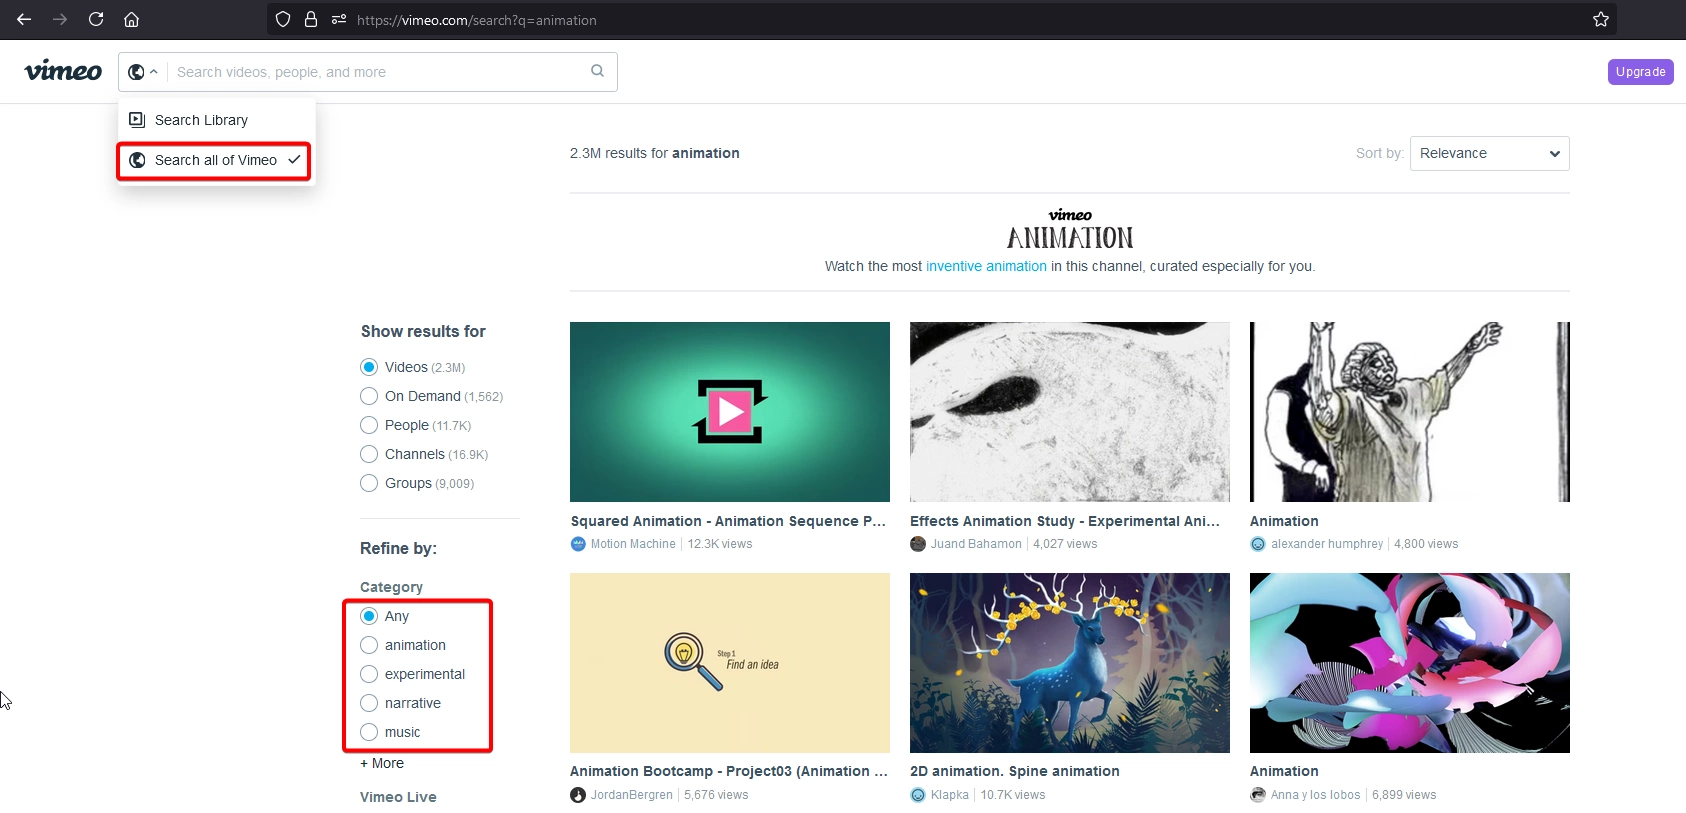 Vimeo category name how to add vimeo channel feed in elementor? From the plus addons for elementor